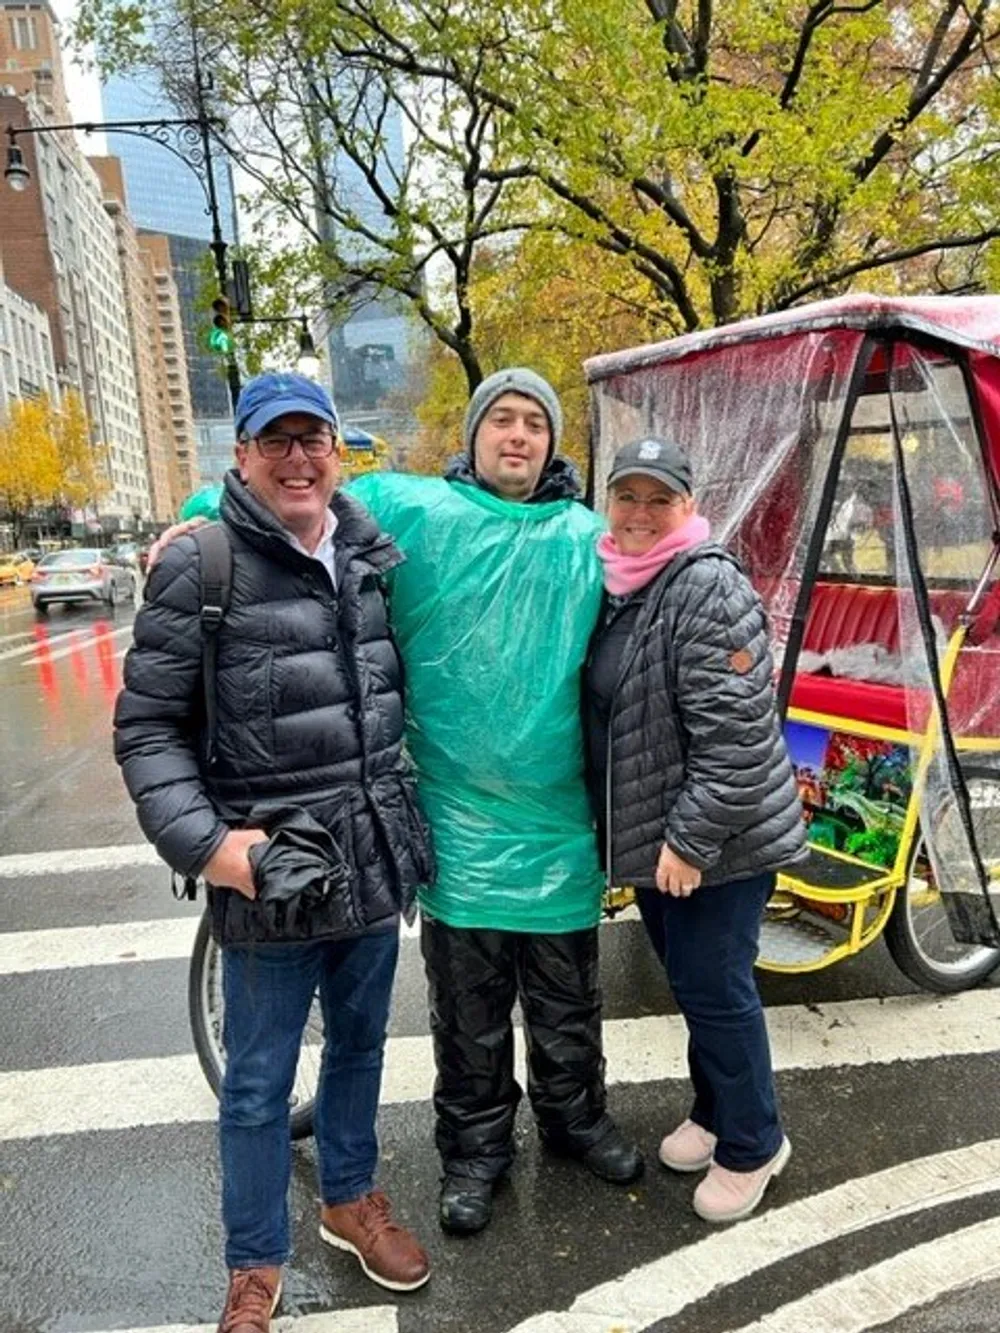 Three people are smiling for the camera on a city street with a rickshaw in the background and the person in the middle is wearing a green rain poncho